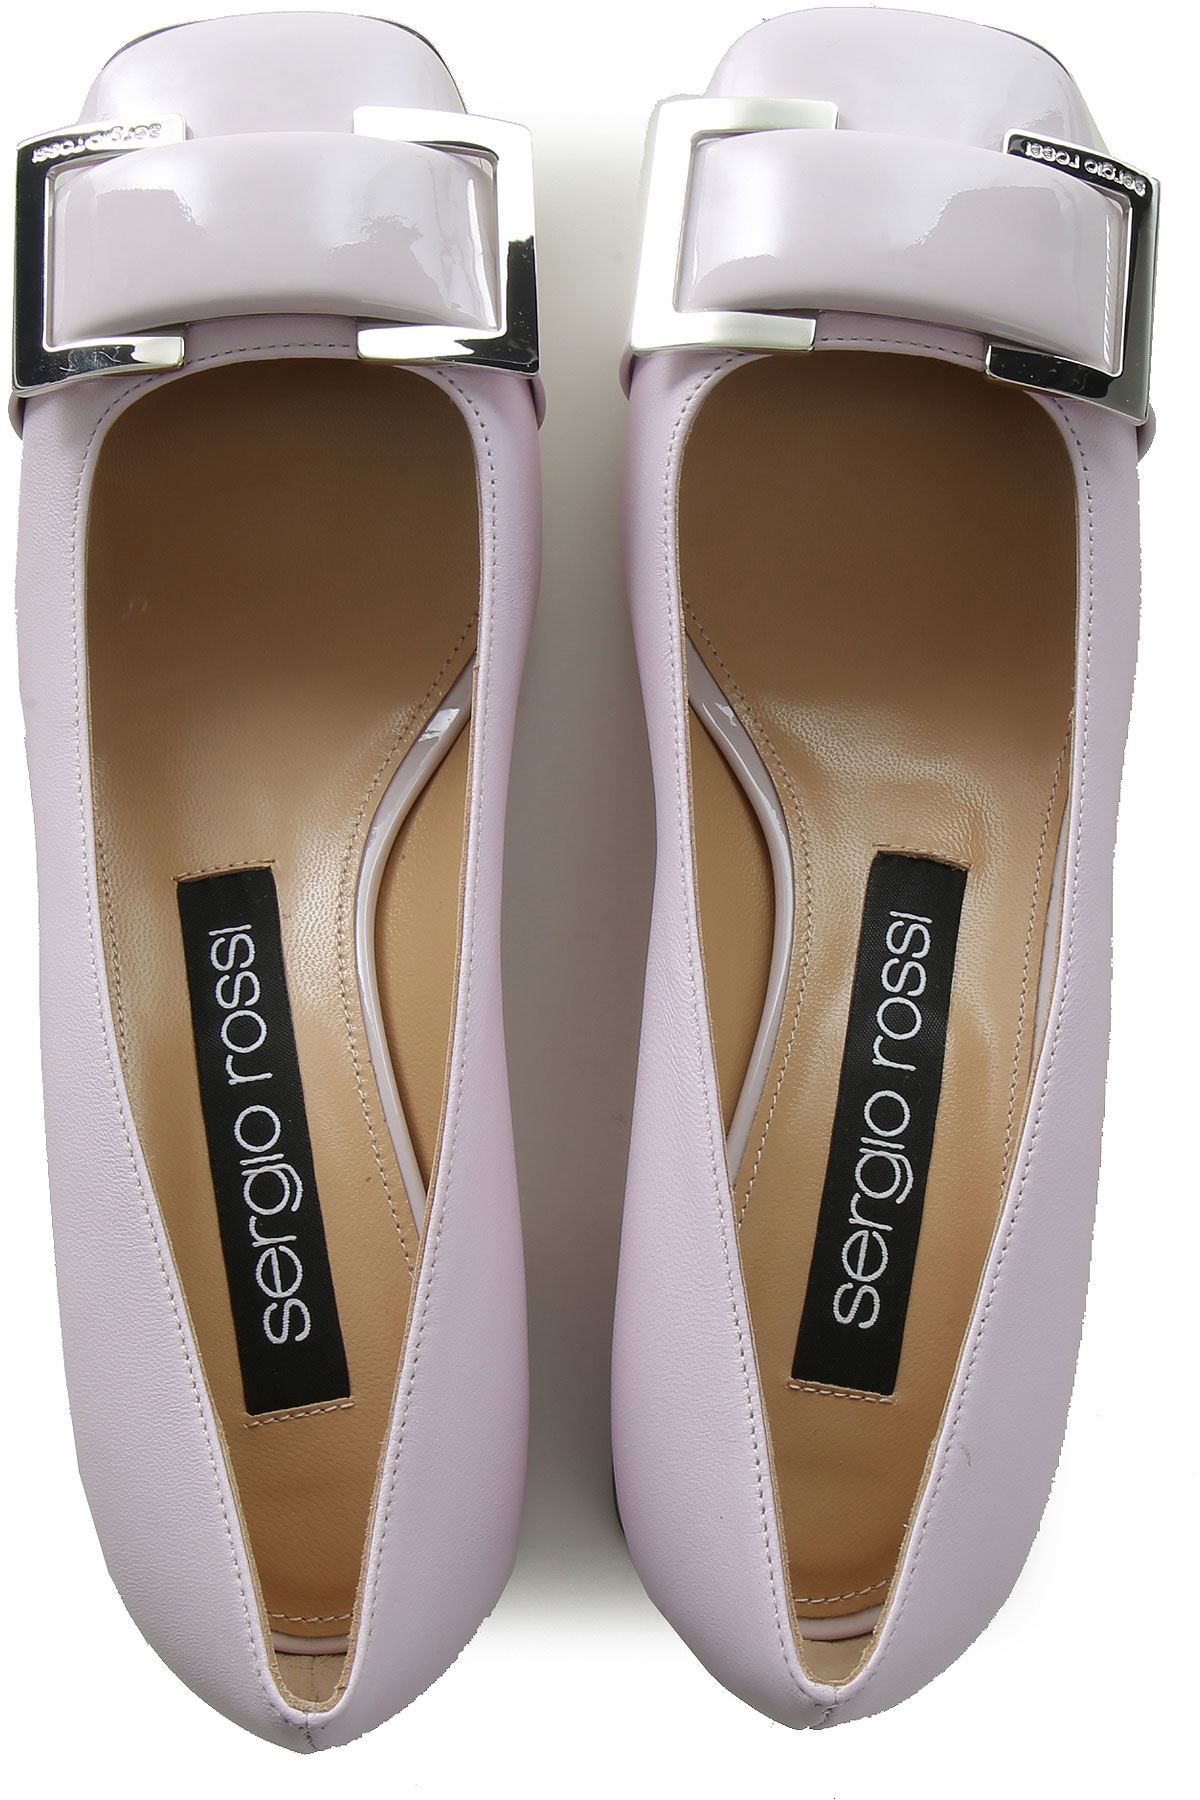 Womens Shoes Sergio Rossi, Style code: a94570mfn595110-5369-